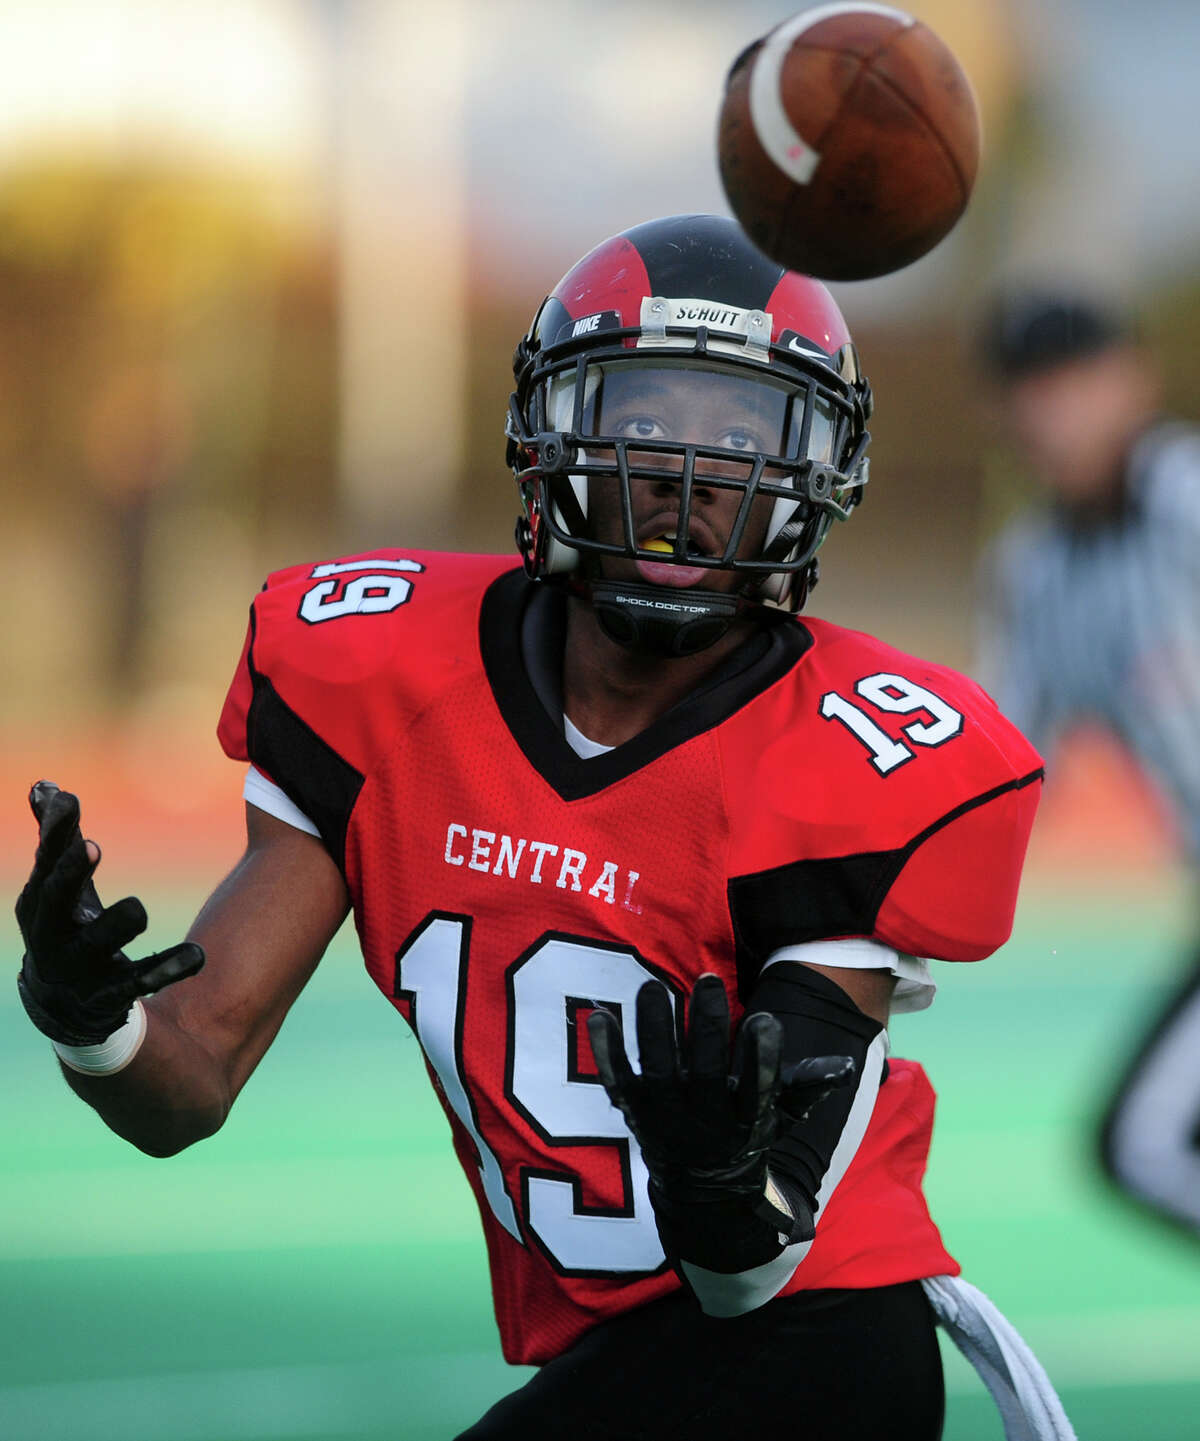 Central's Keyshawn Thomas receives a touchdown pass, during high school football action against Greenwich in Bridgeport, Conn. on Friday November 1, 2013.